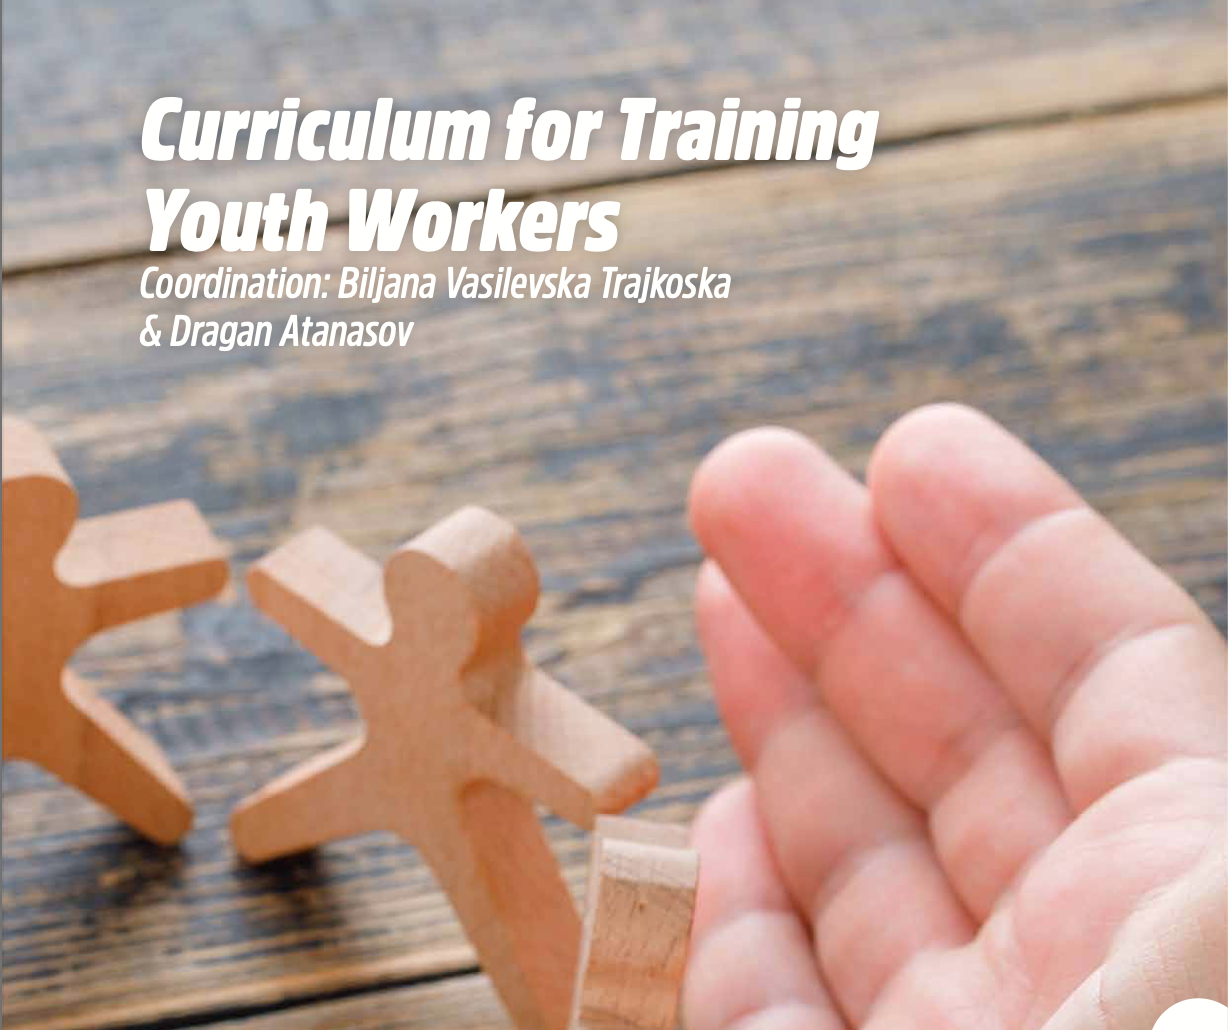 Curriculum for Training Youth Workers now available!